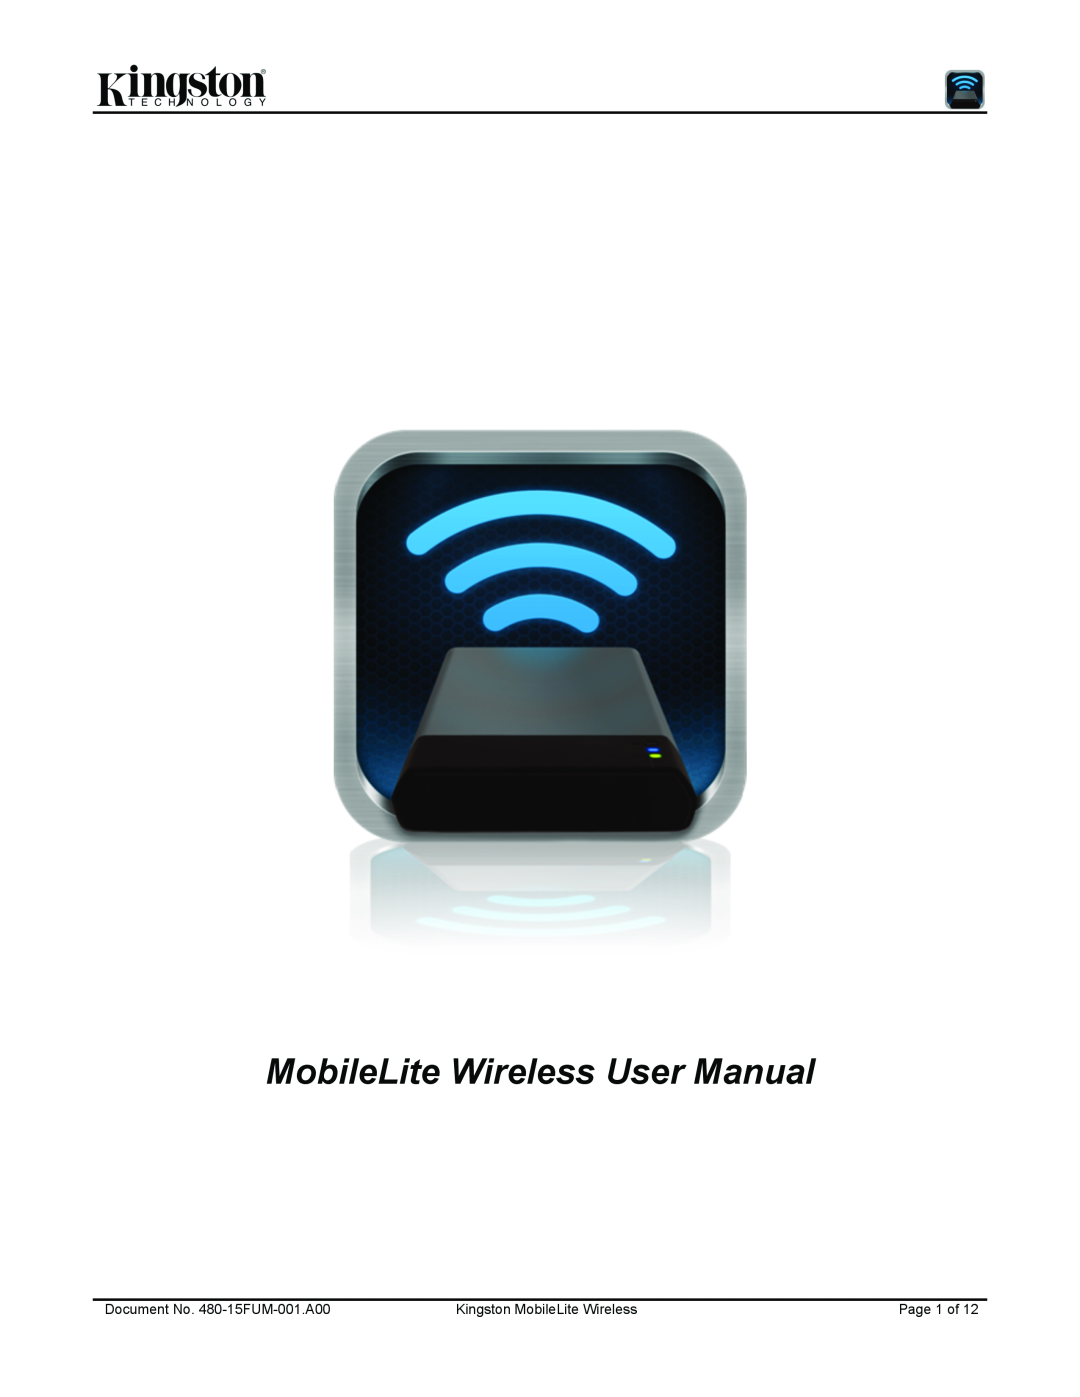 Kingston Technology user manual Document No. 480-15FUM-001.A00, Kingston MobileLite Wireless, Page 1 of 